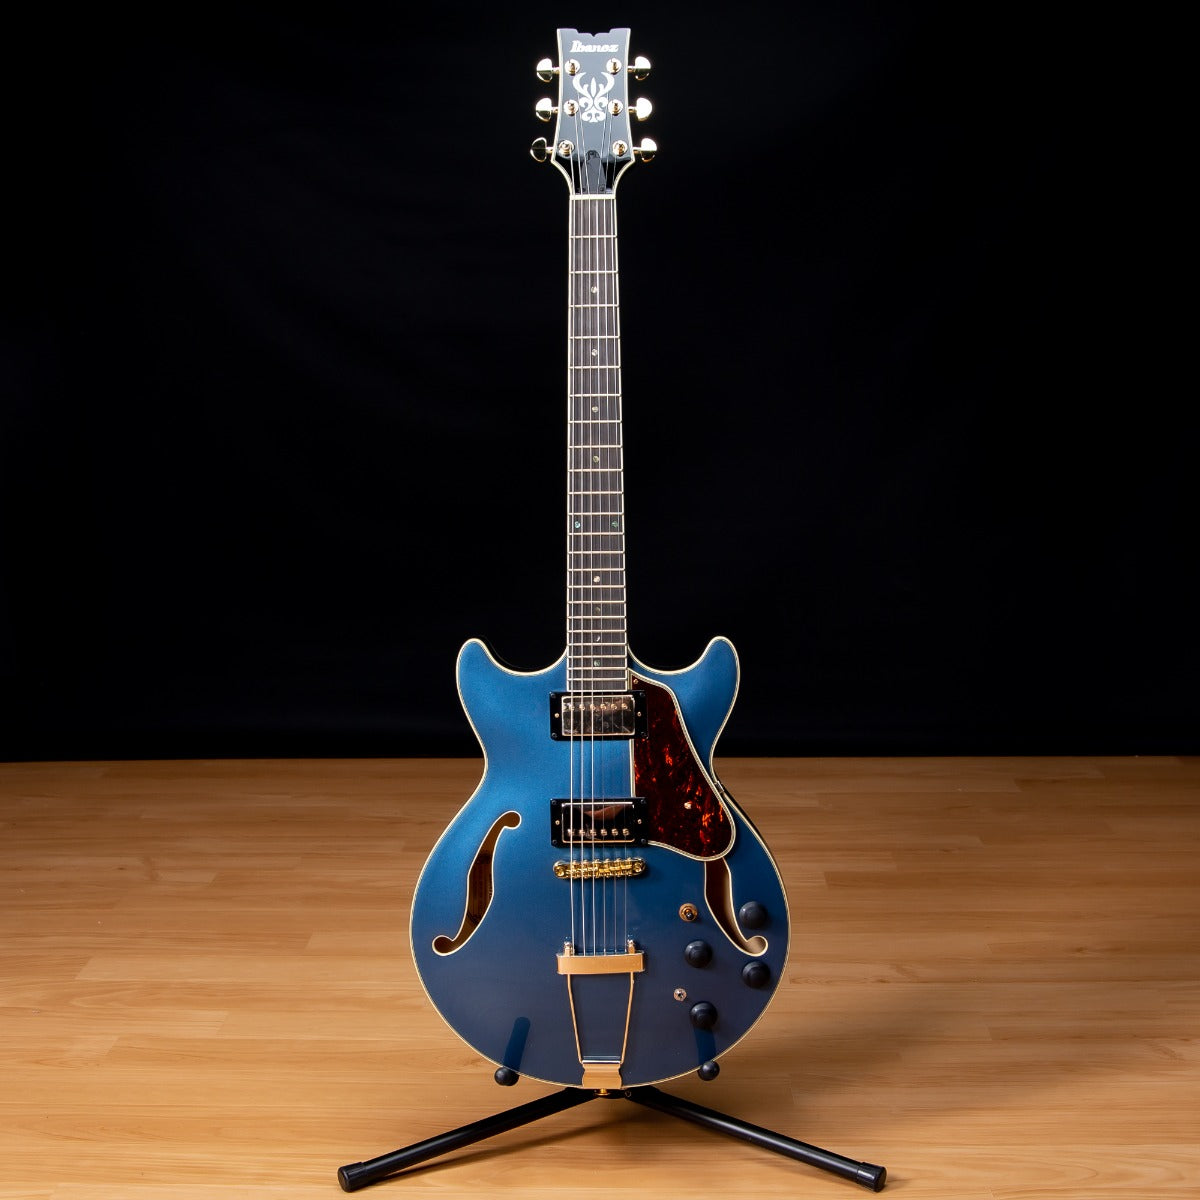 Ibanez AMH90 AM Artcore Expressionist Semi-Hollow Electric Guitar -  Prussian Blue Metallic SN 22020975